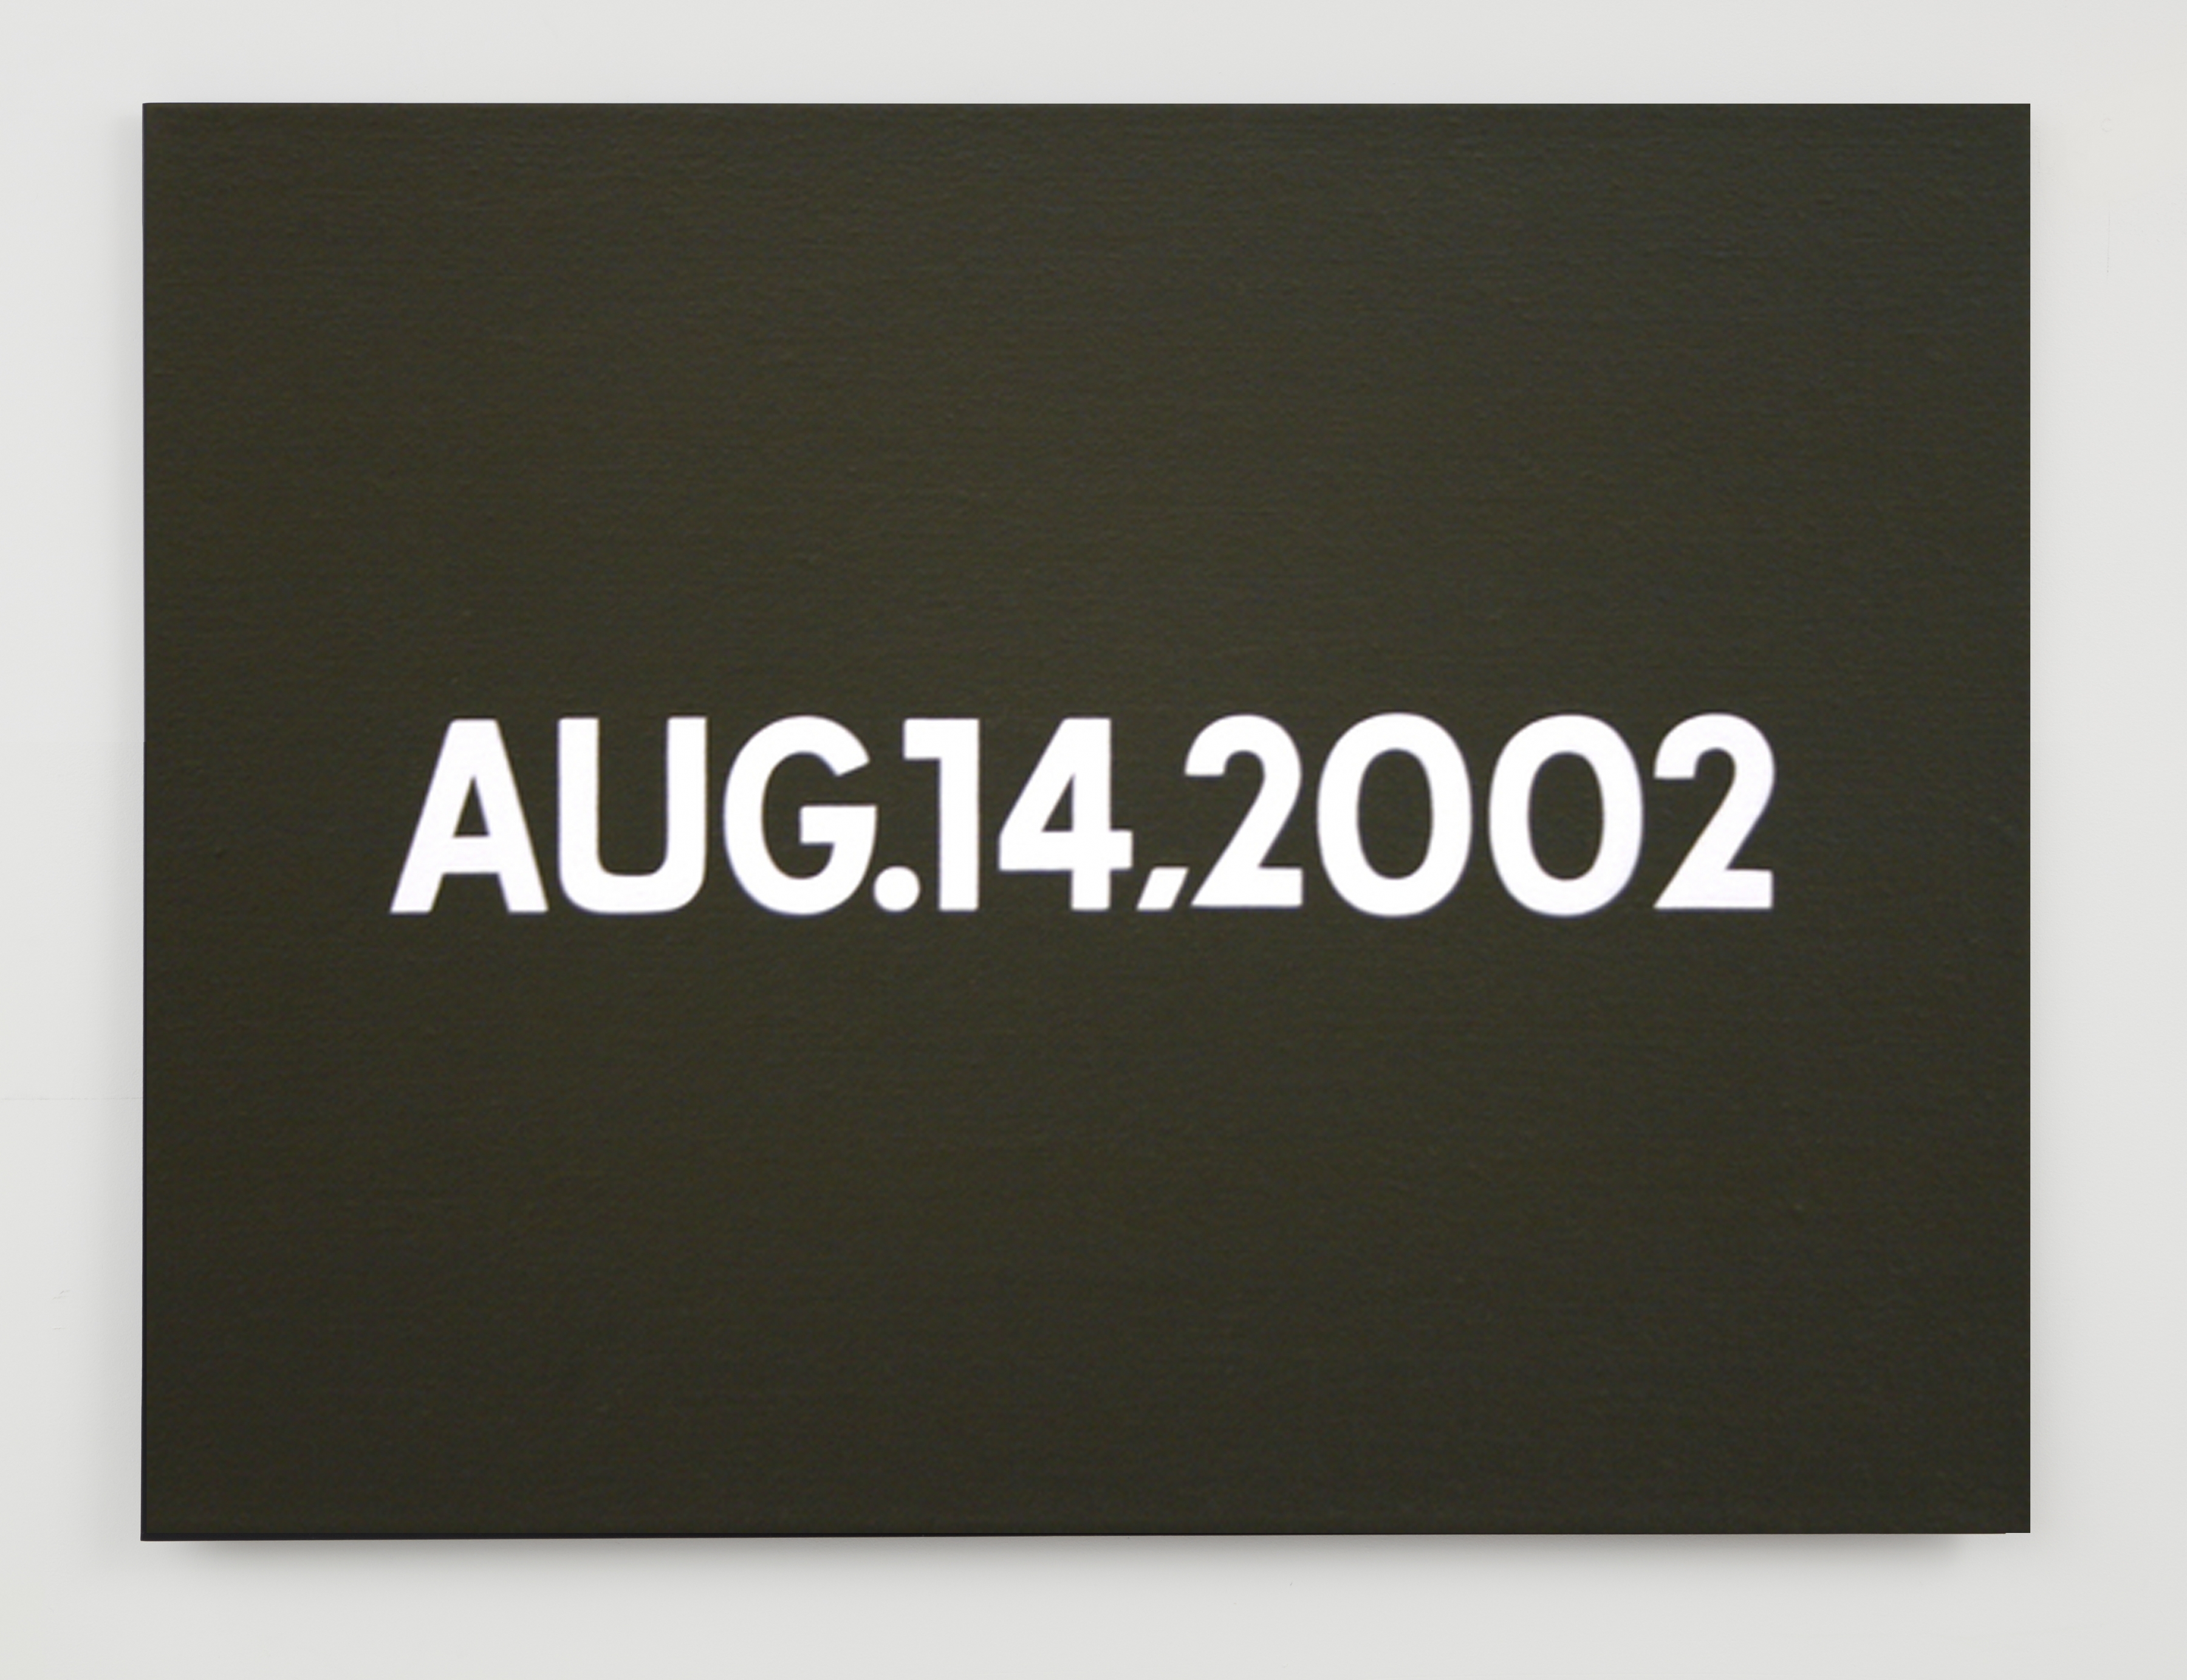 On Kawara
AUG. 14, 2002,&amp;nbsp;2002
from &amp;quot;Today&amp;quot; series, 1966-2013&amp;nbsp;
acrylic on canvas
8 x 10 1/2 in. (20.3 x 26.7 cm)

The collection of Paul Marks